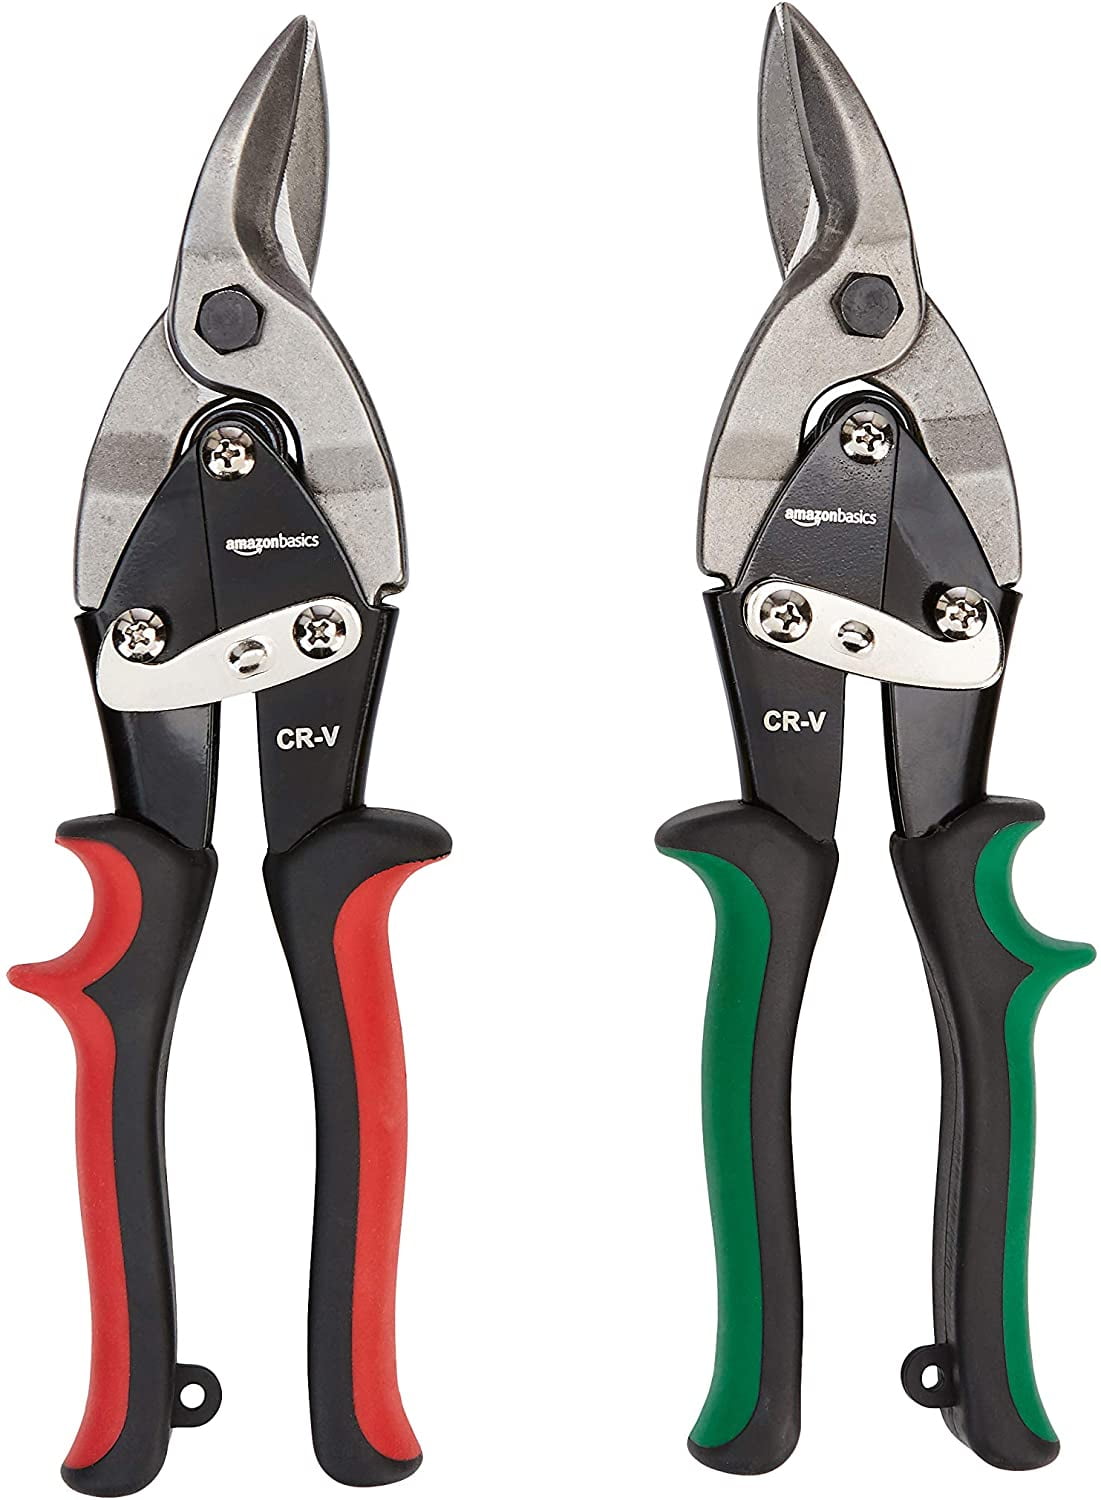 3pc LEFT RIGHT-AND STRAIGHT CUT EDGES CR-V HEAVY DUTY PROFESSIONAL TIN SNIPS